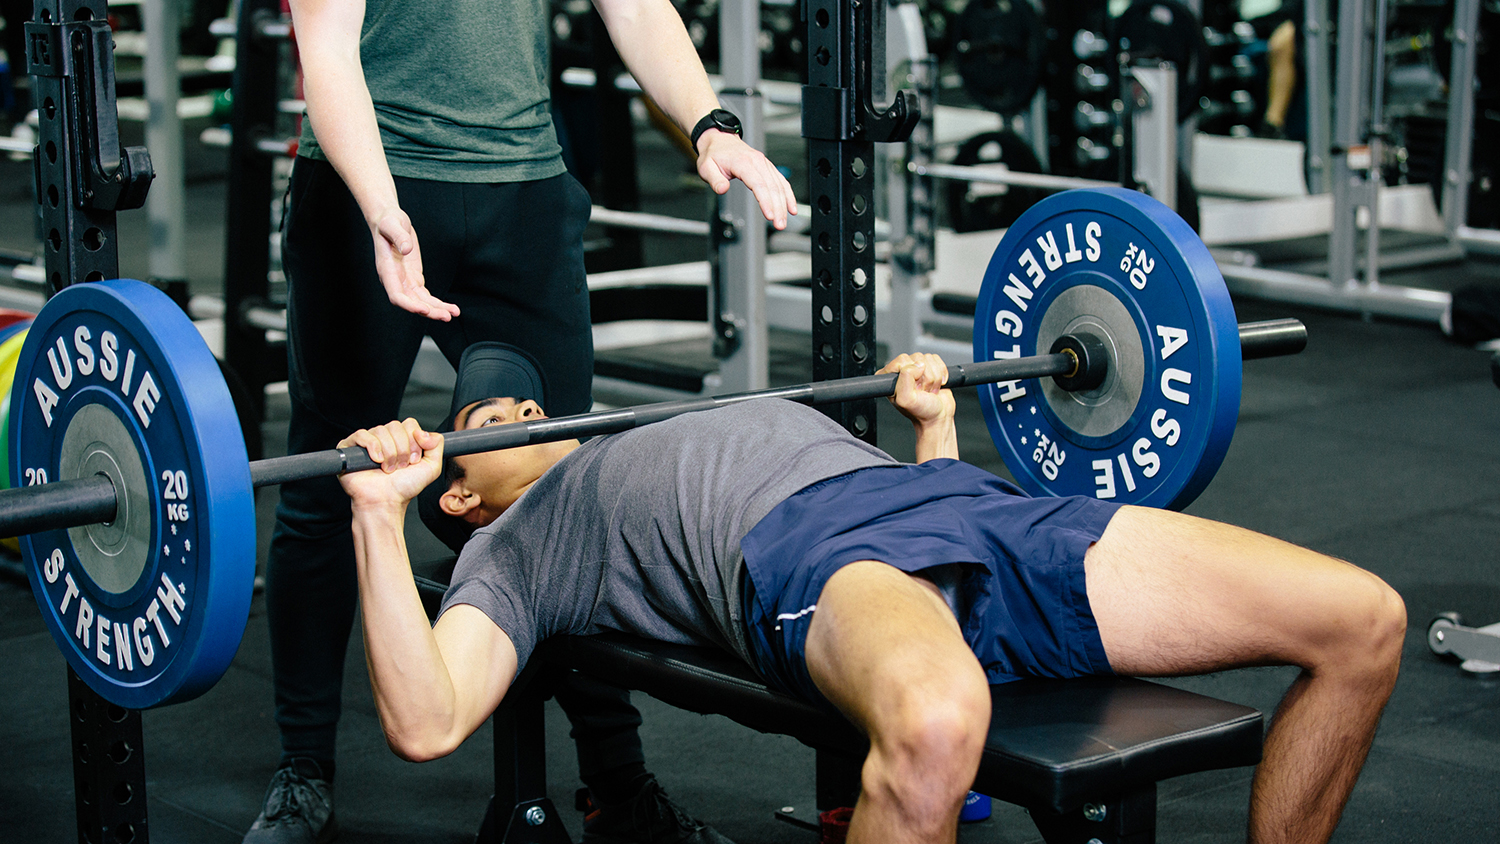 young man lying on a gym bench with a weighted bar across his chest. His elbows are bent as if to raise his arm and the bar. A man stands over him with hands outstretched ready to assist in raising the bar if required.